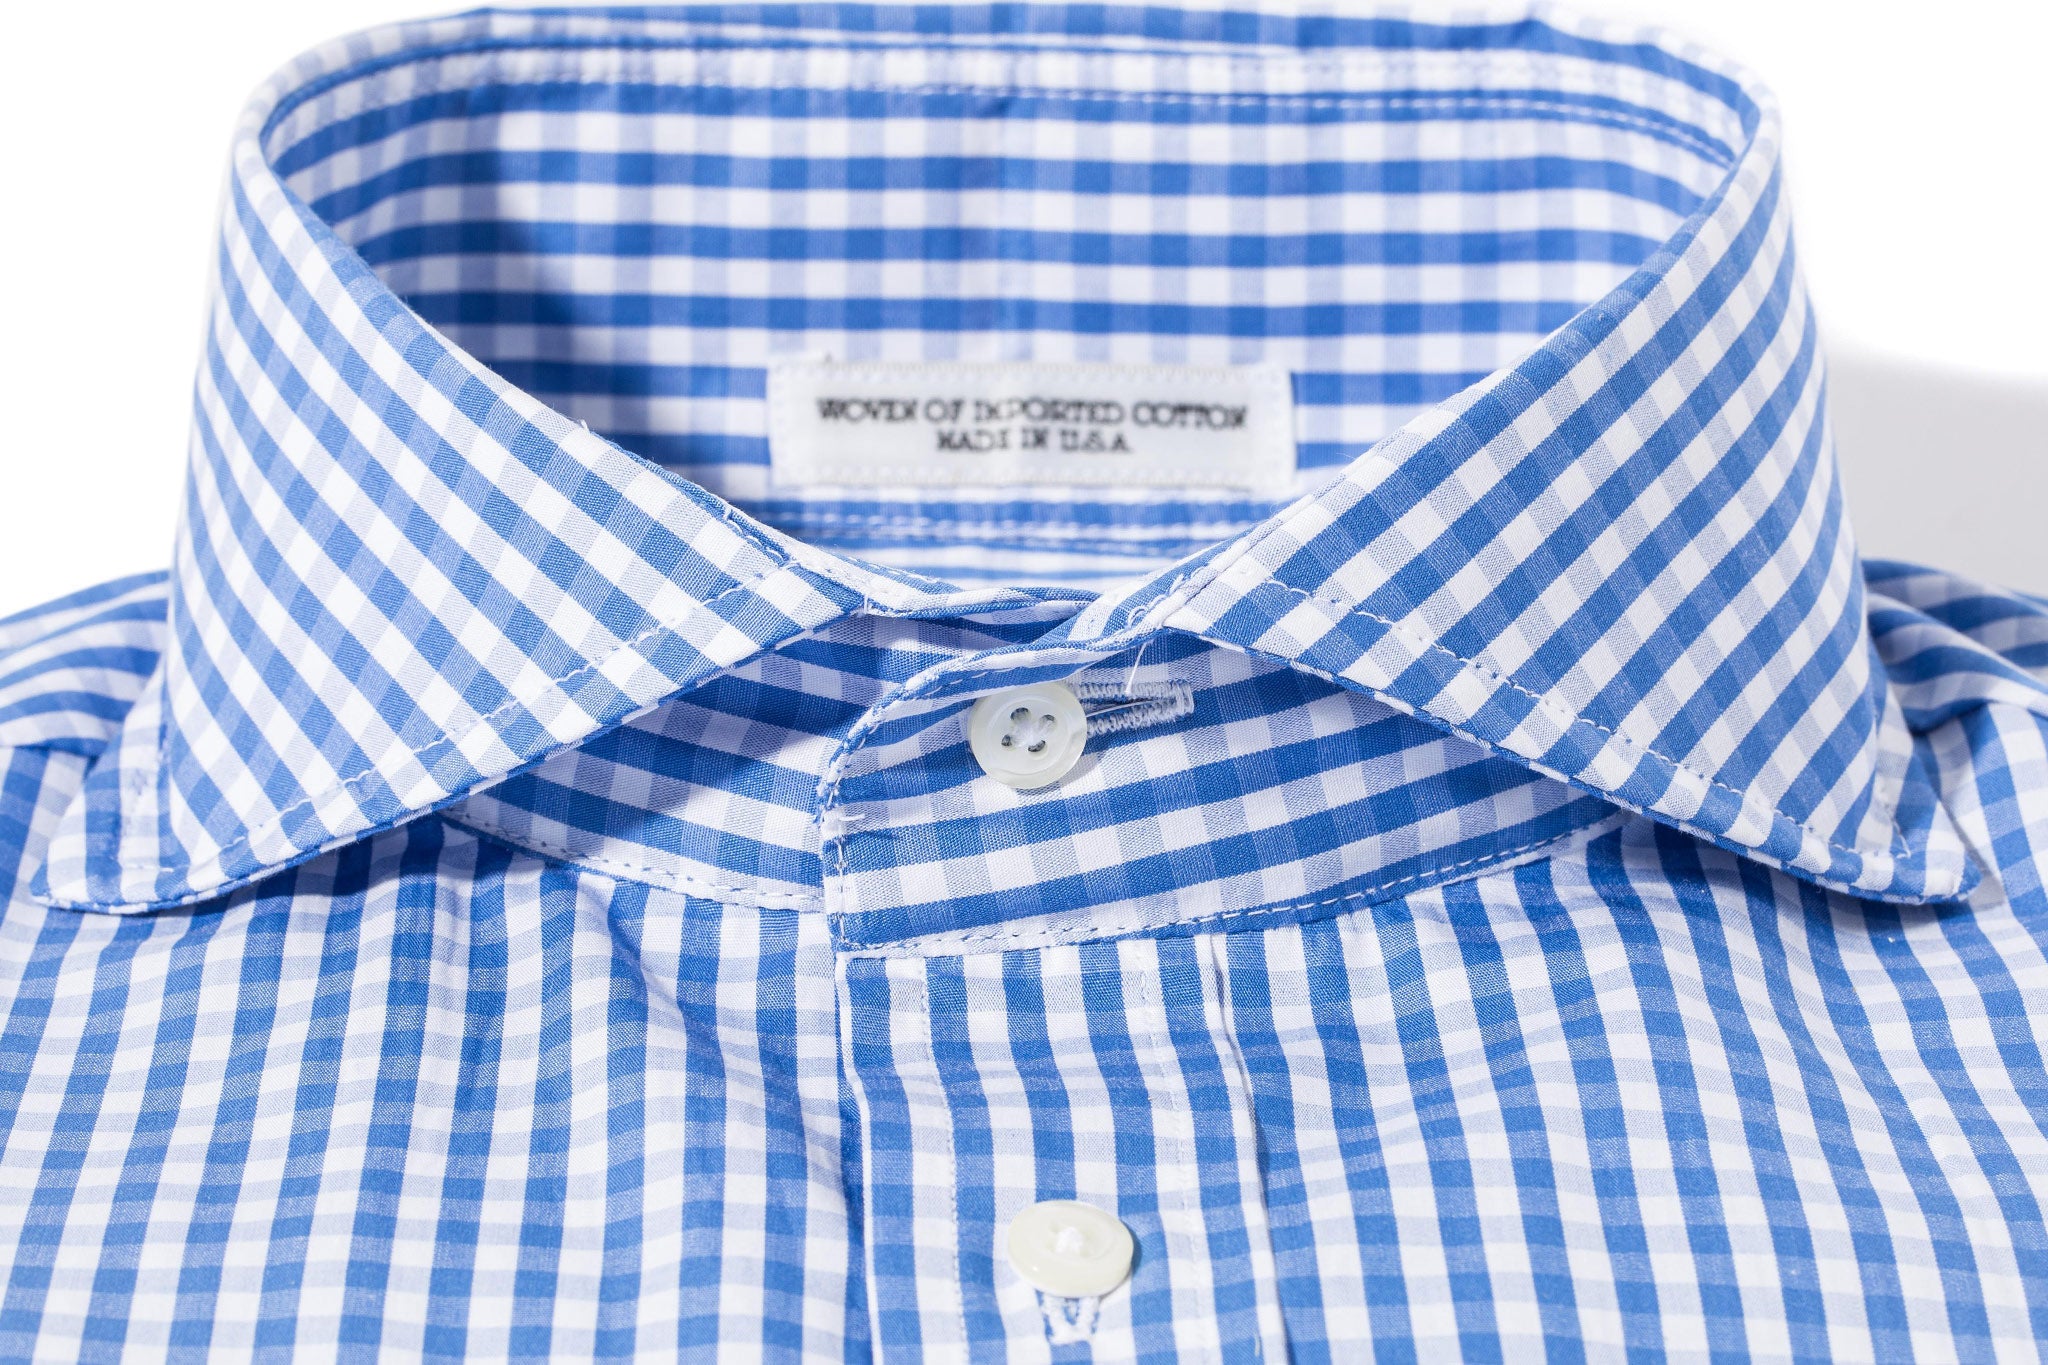 Birkdale Check Dress Shirt In Blue | Mens - Shirts - Outpost | Axels-Is